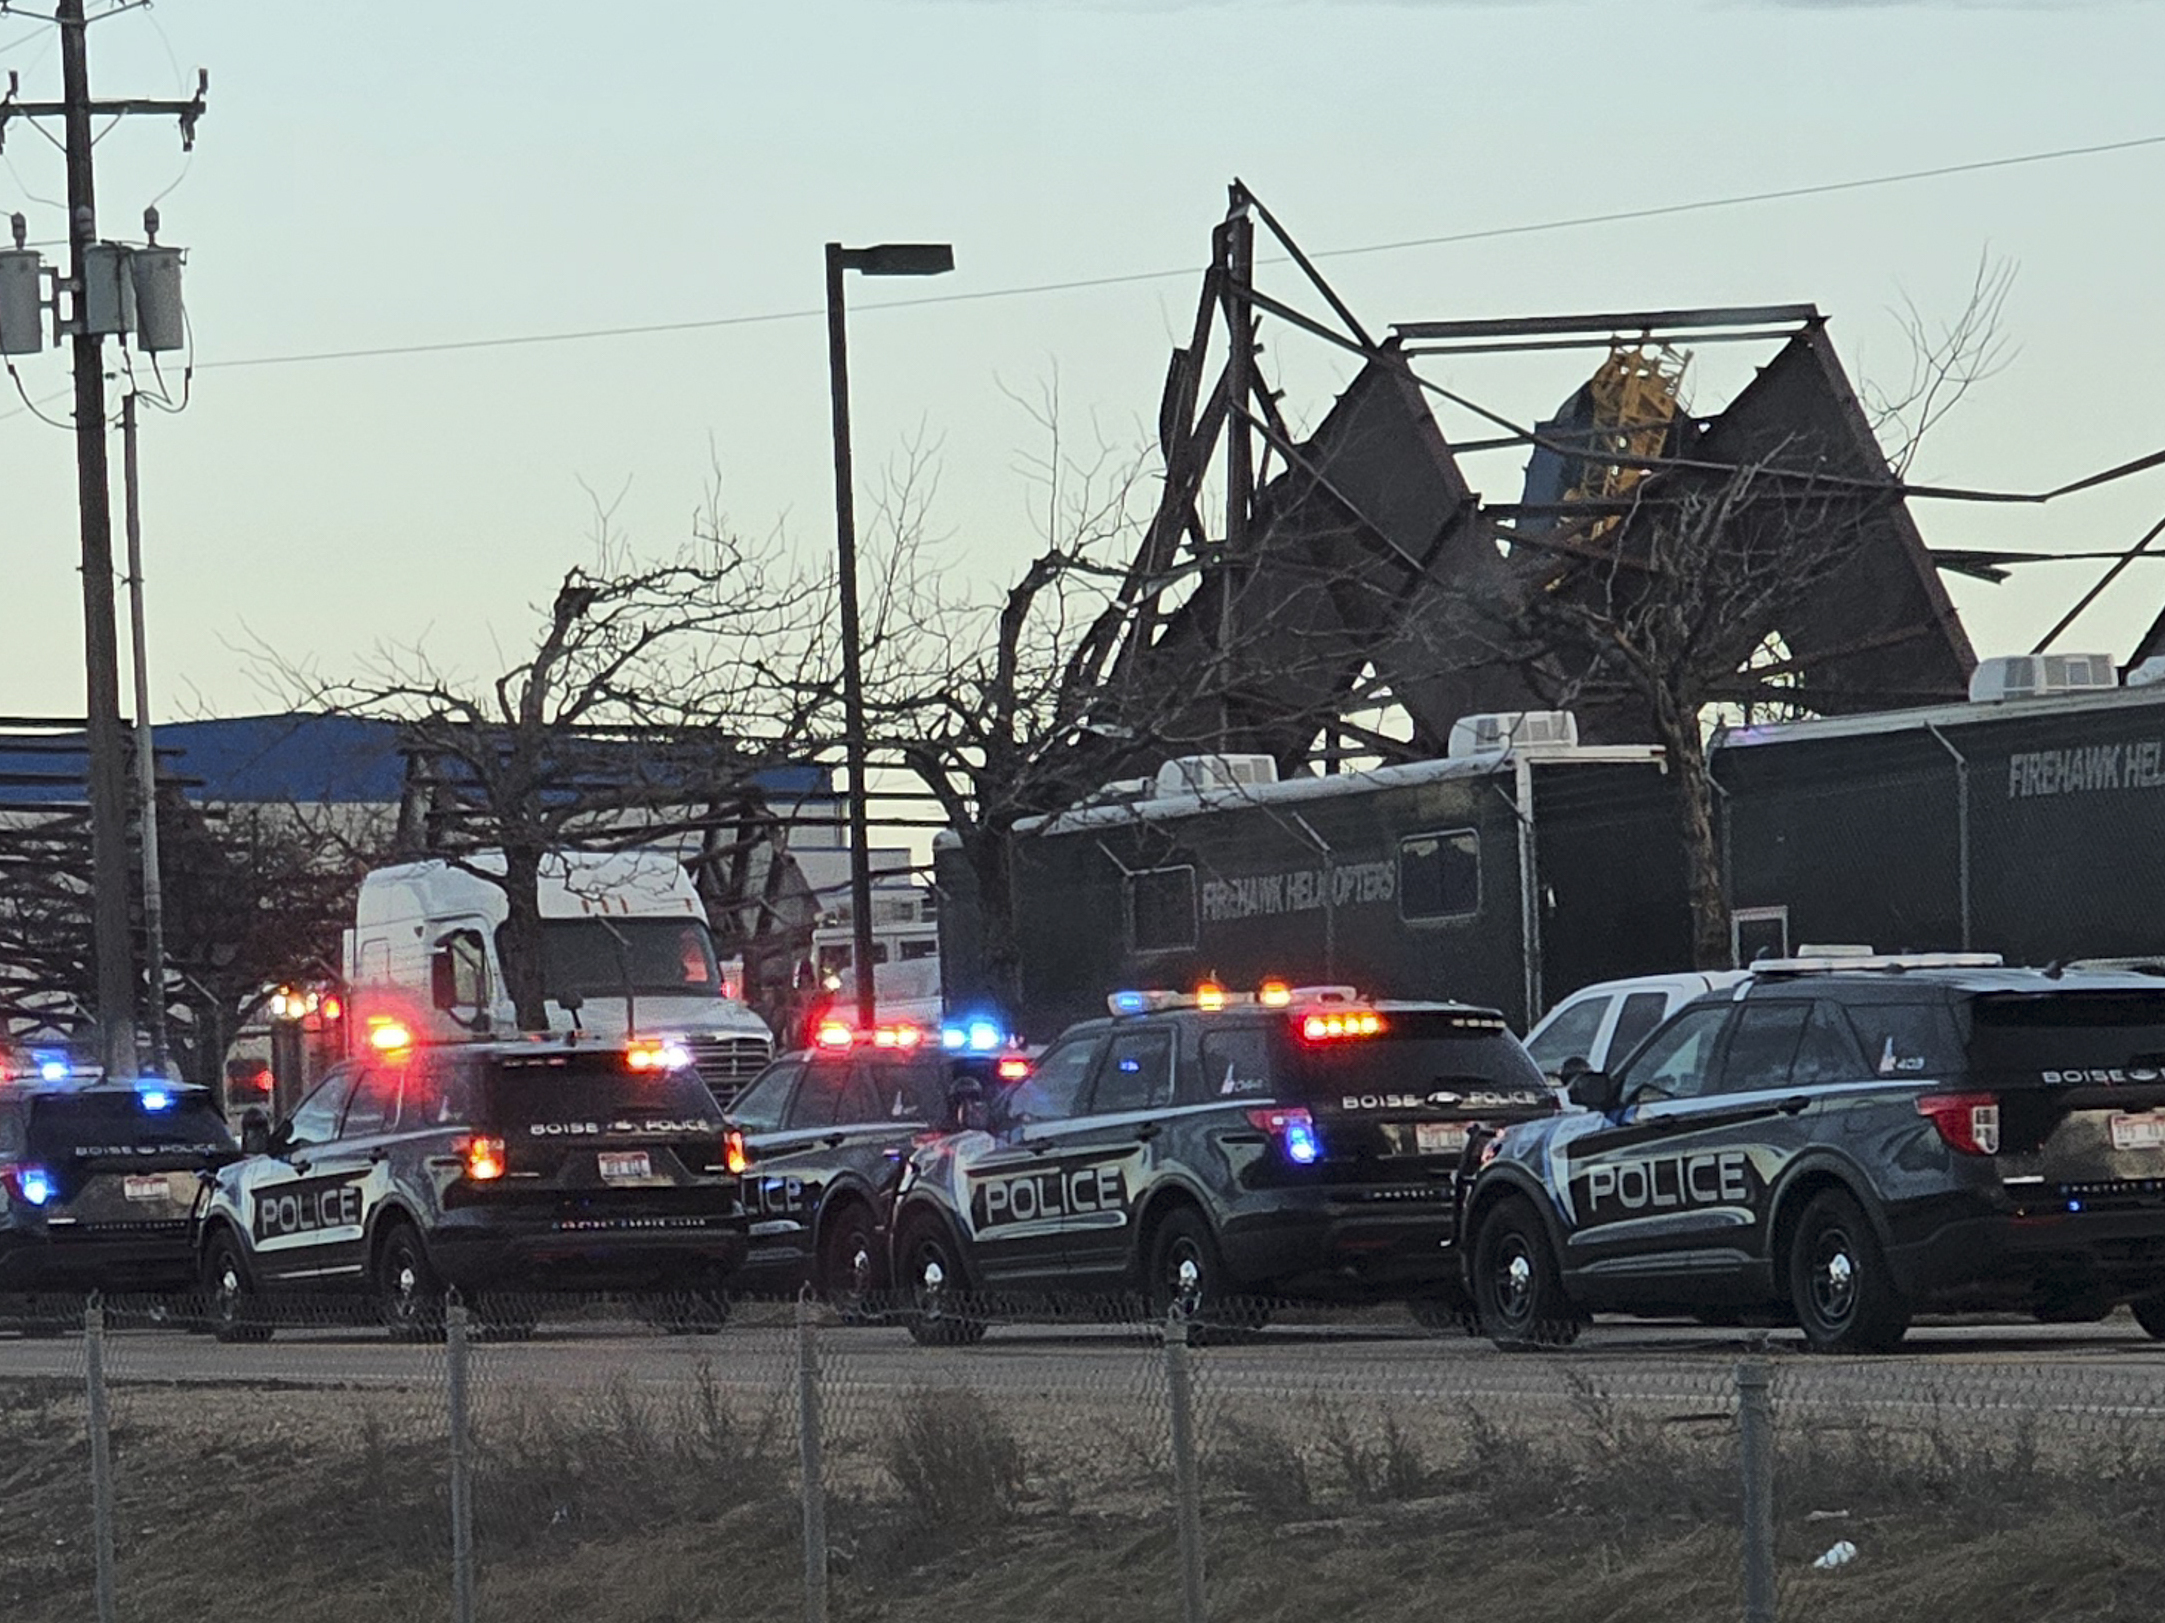 3 people are killed and 9 injured after a hangar collapses at an Idaho airport